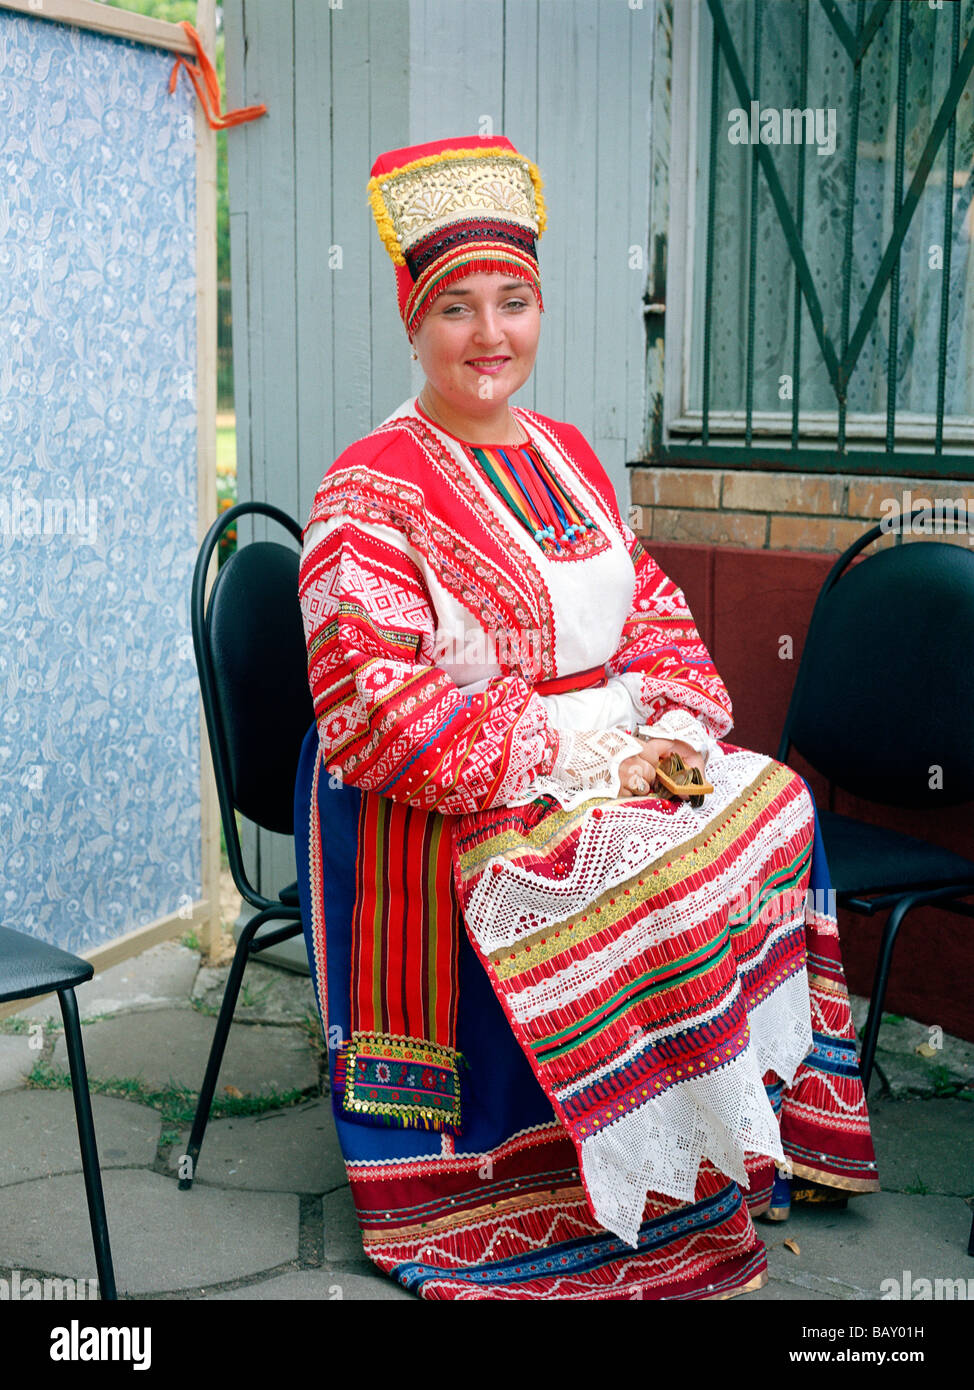 Femme en costume traditionnel russe, Moscou, Russie Photo Stock - Alamy